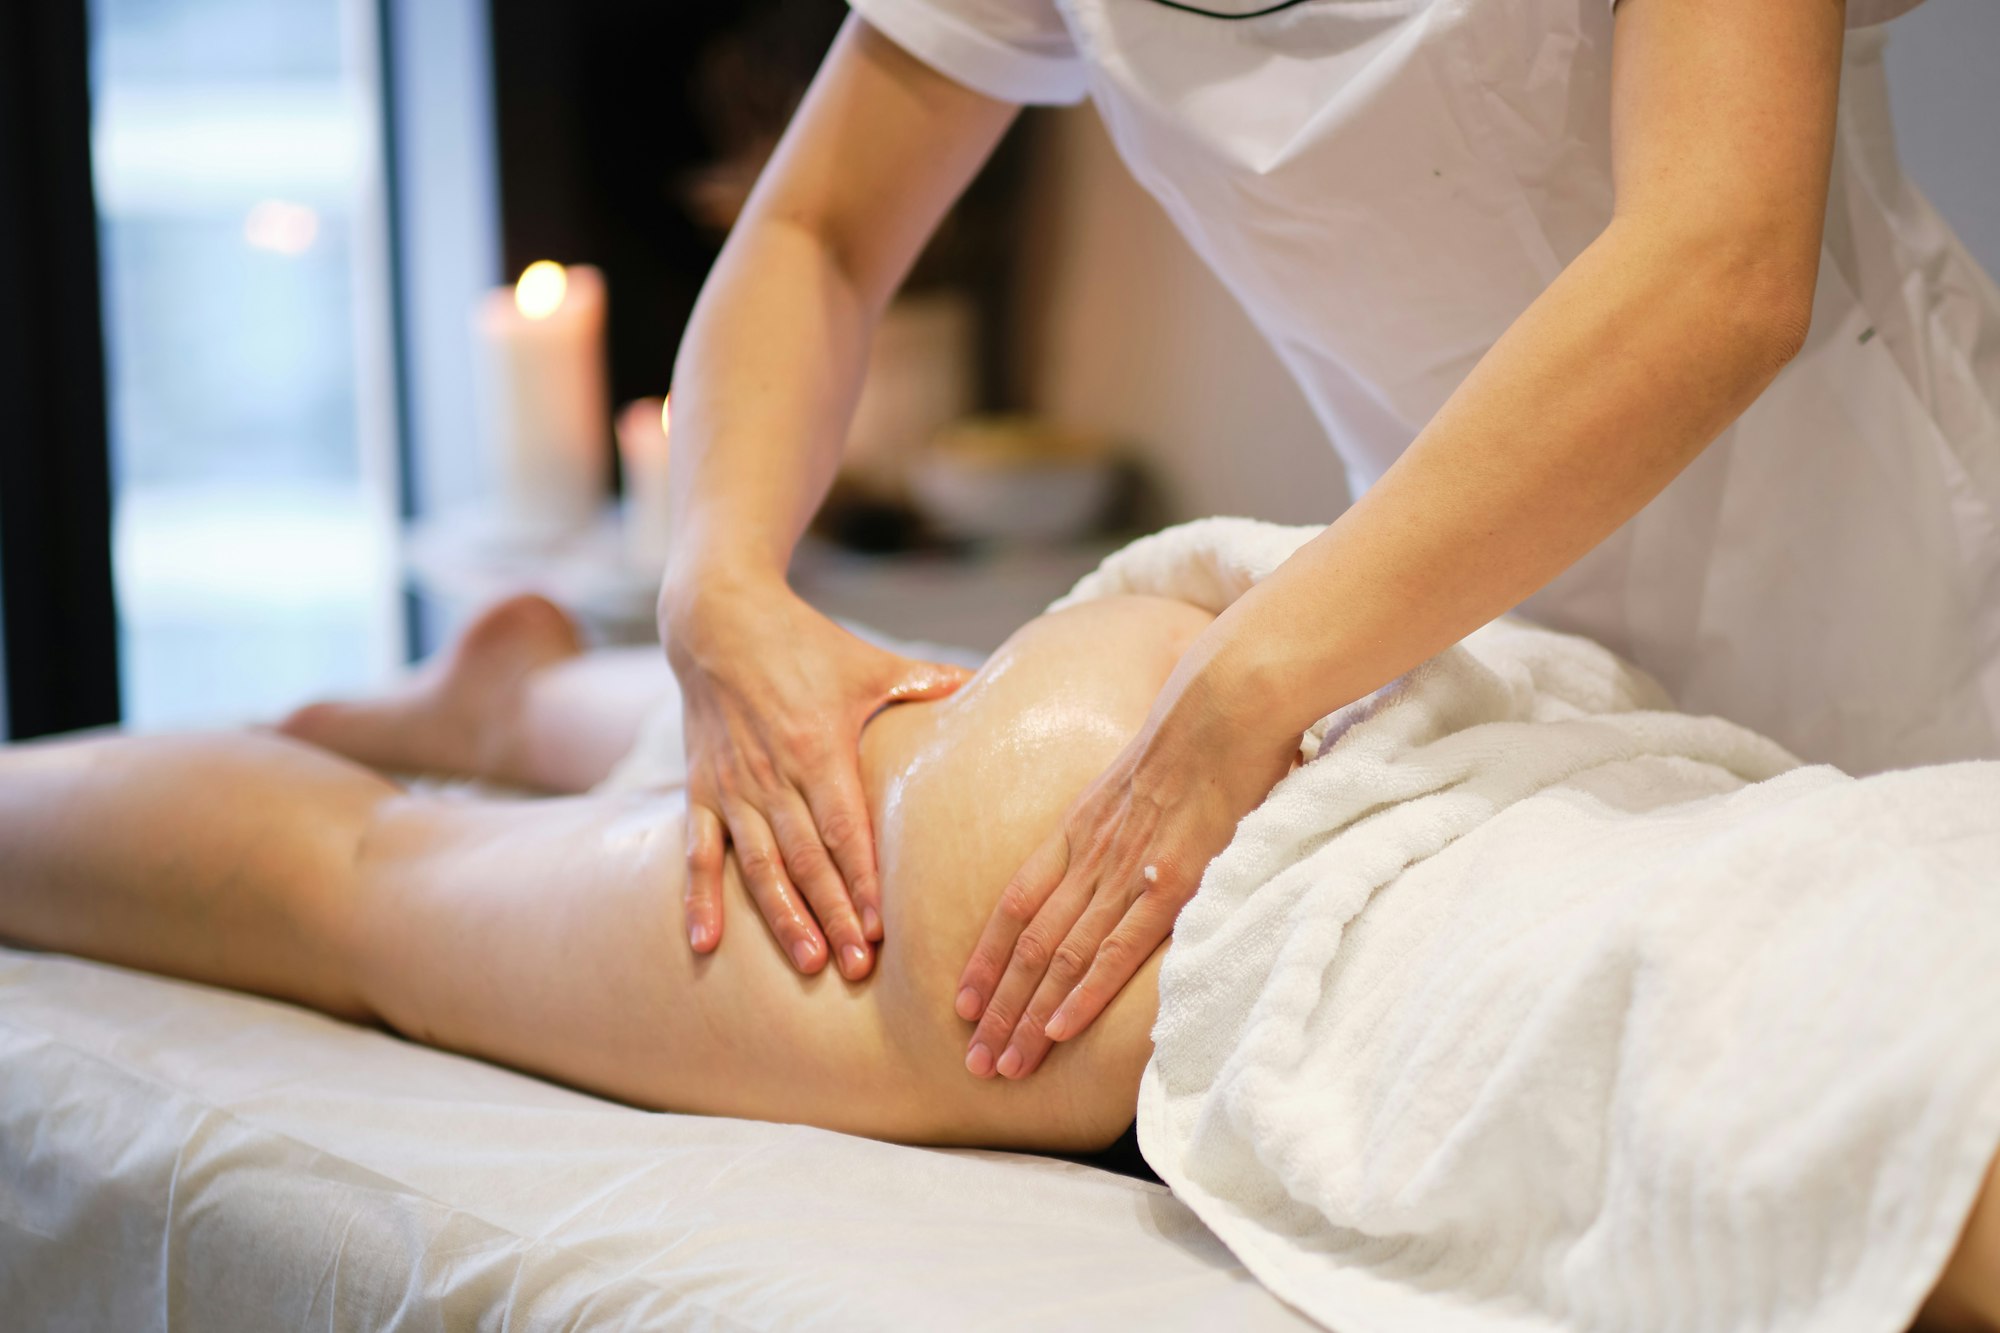 Relaxed woman receiving anti-cellulite massage from a therapist on massage table